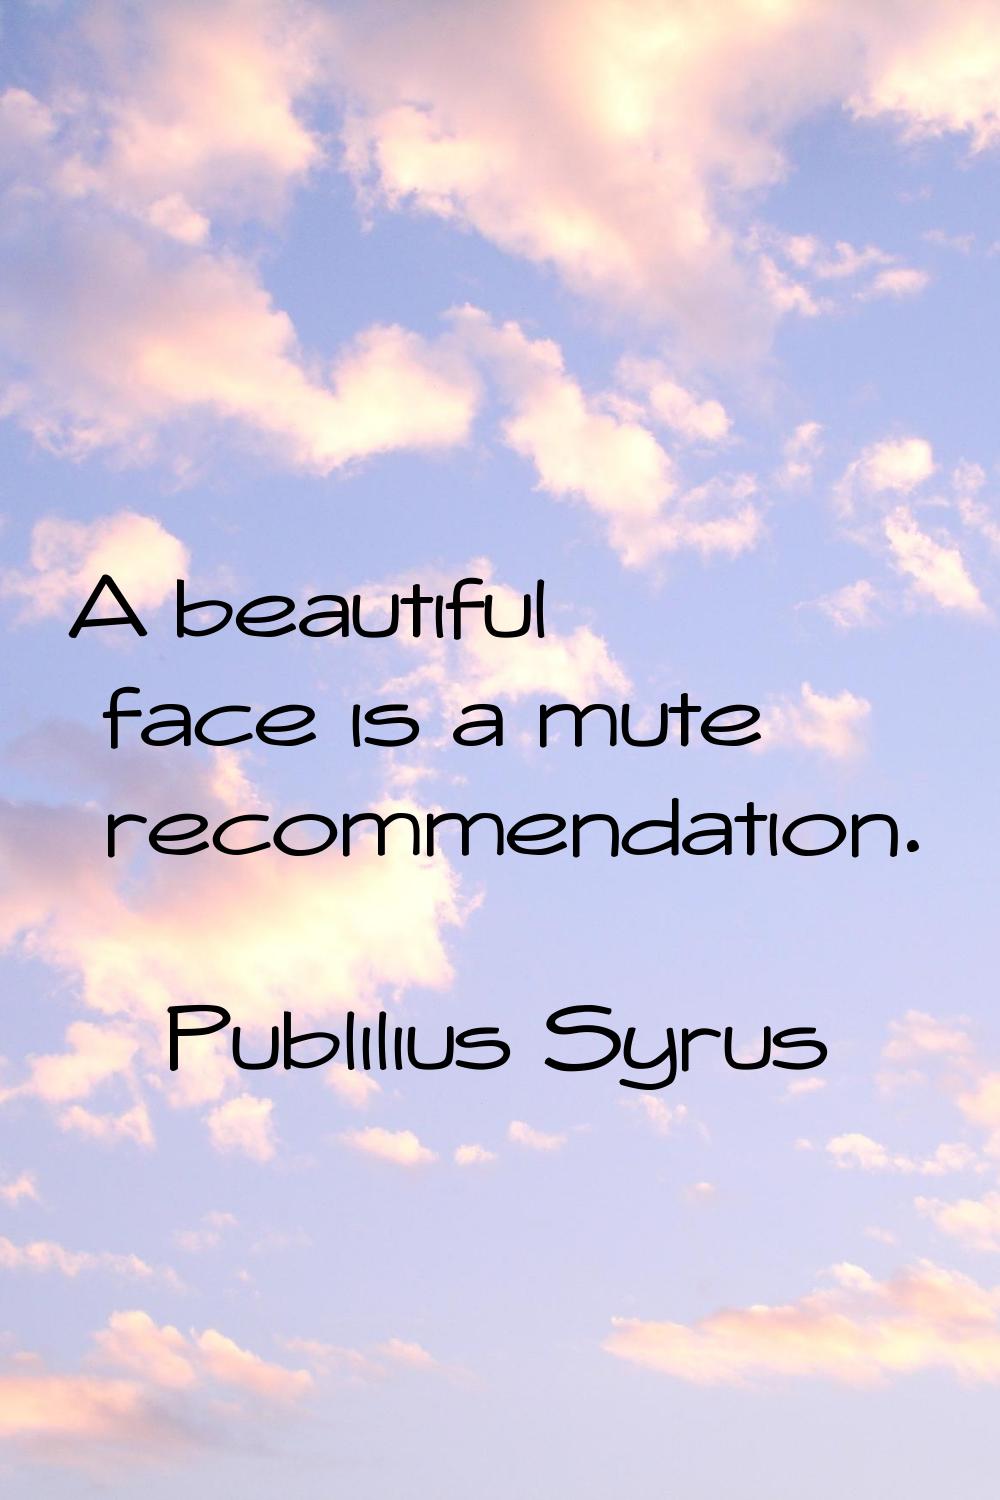 A beautiful face is a mute recommendation.